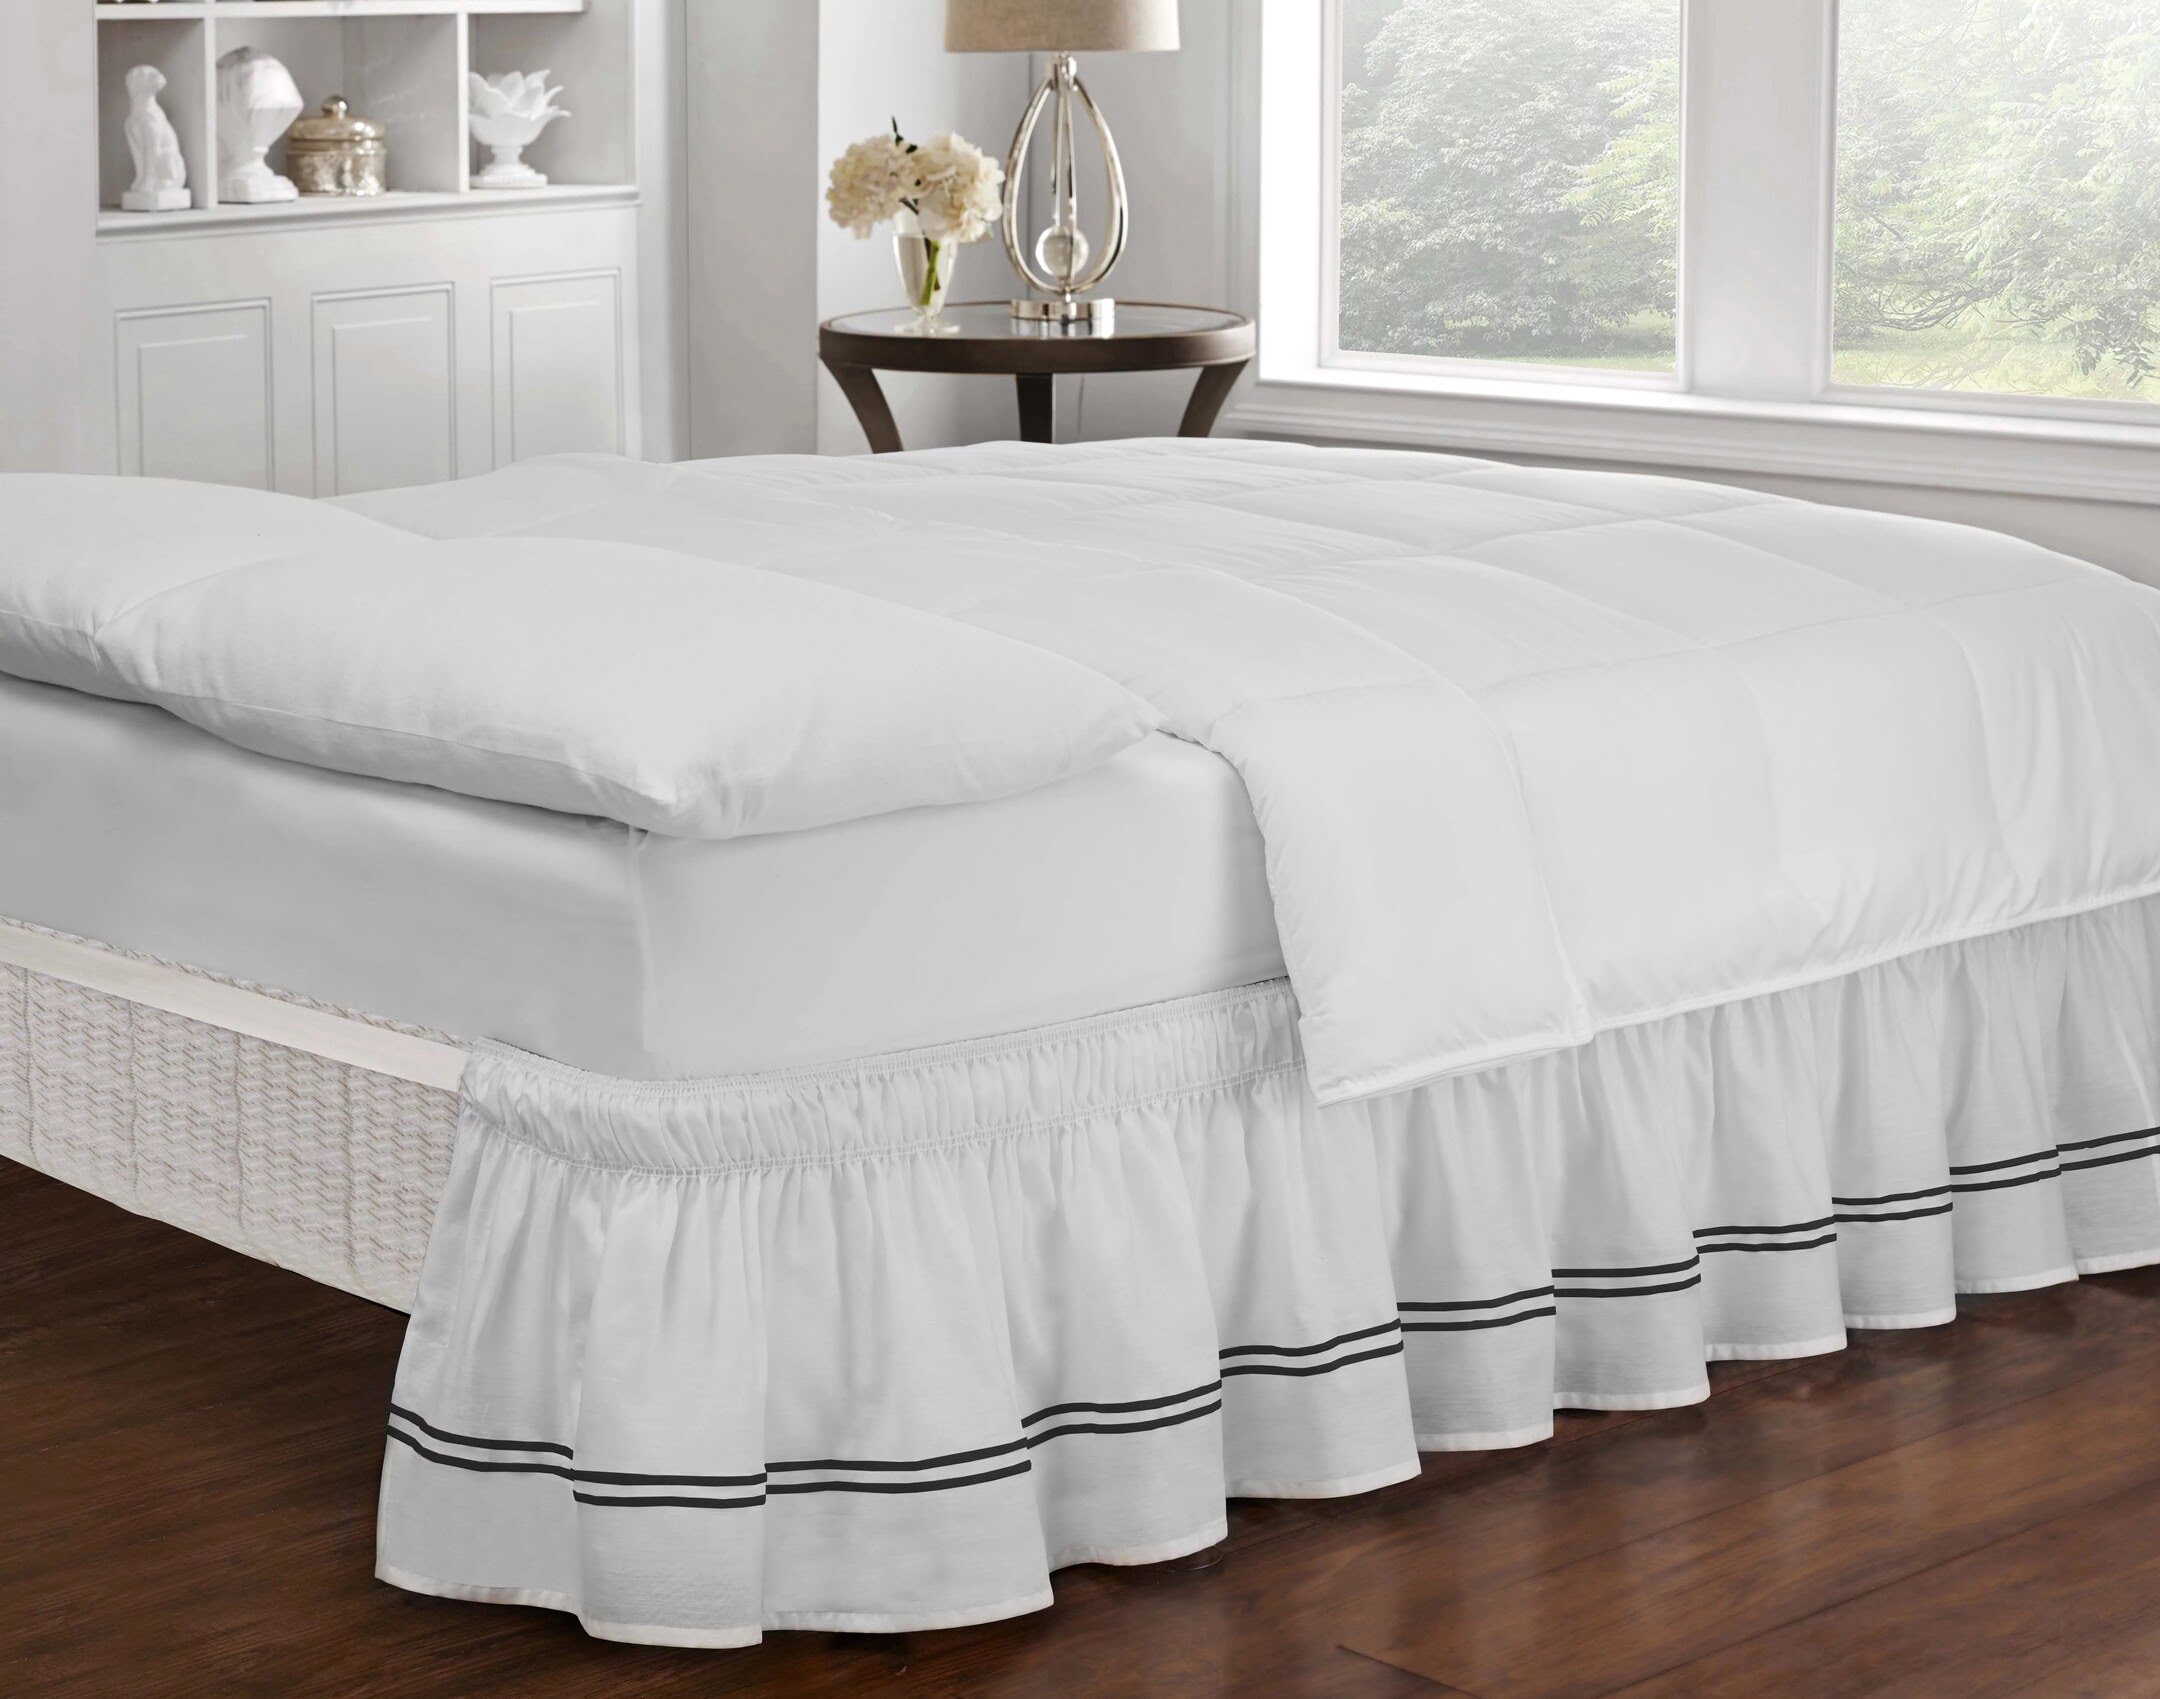 How To Put On A Bed Skirt